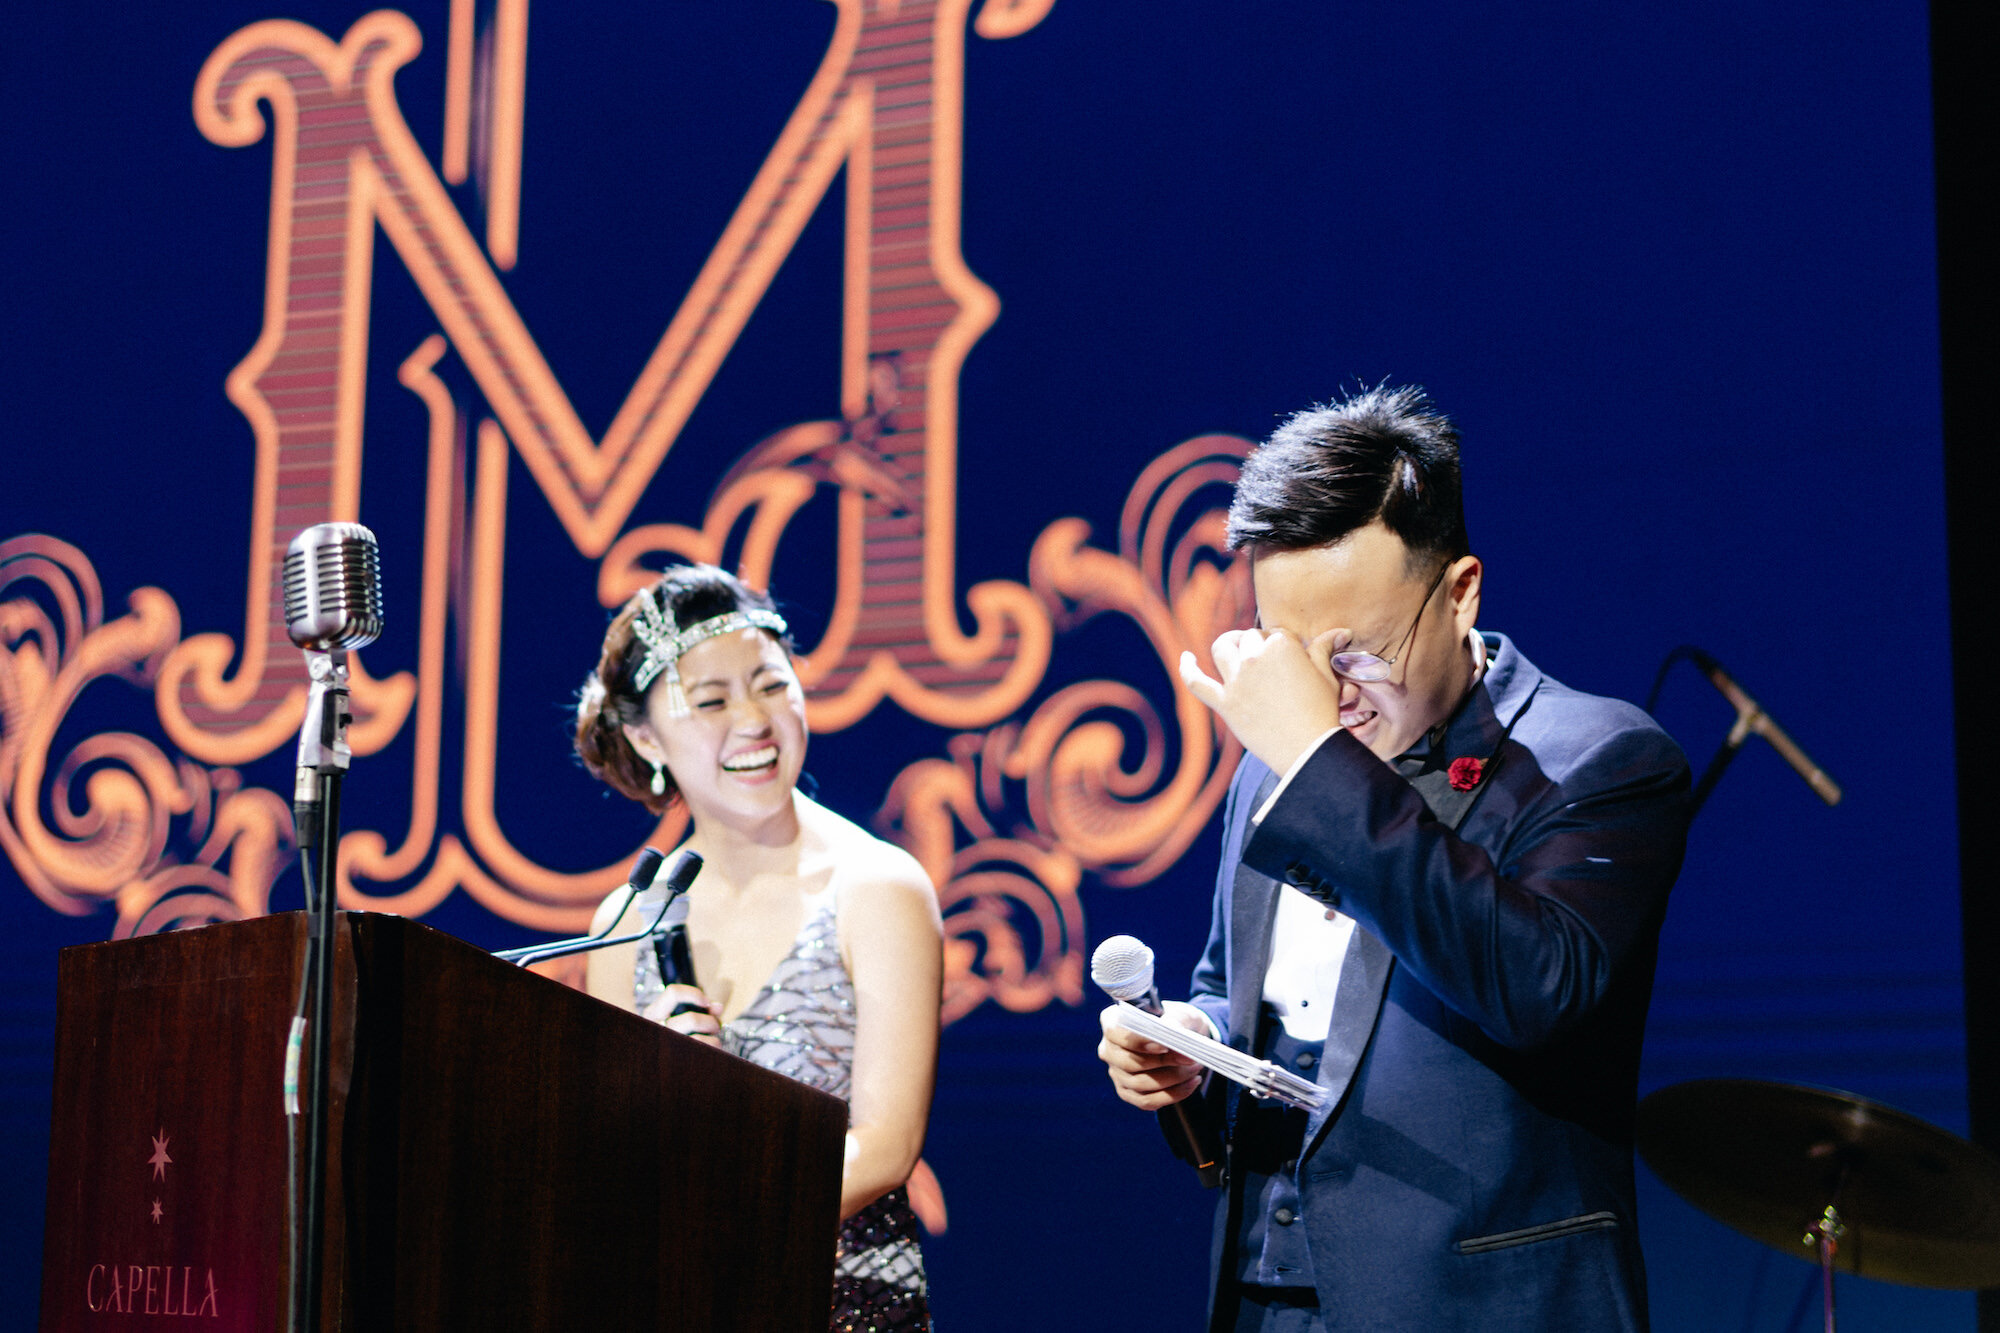 20191026_Lyn and Ming Xian_Capella Singapore (243 of 398).JPG